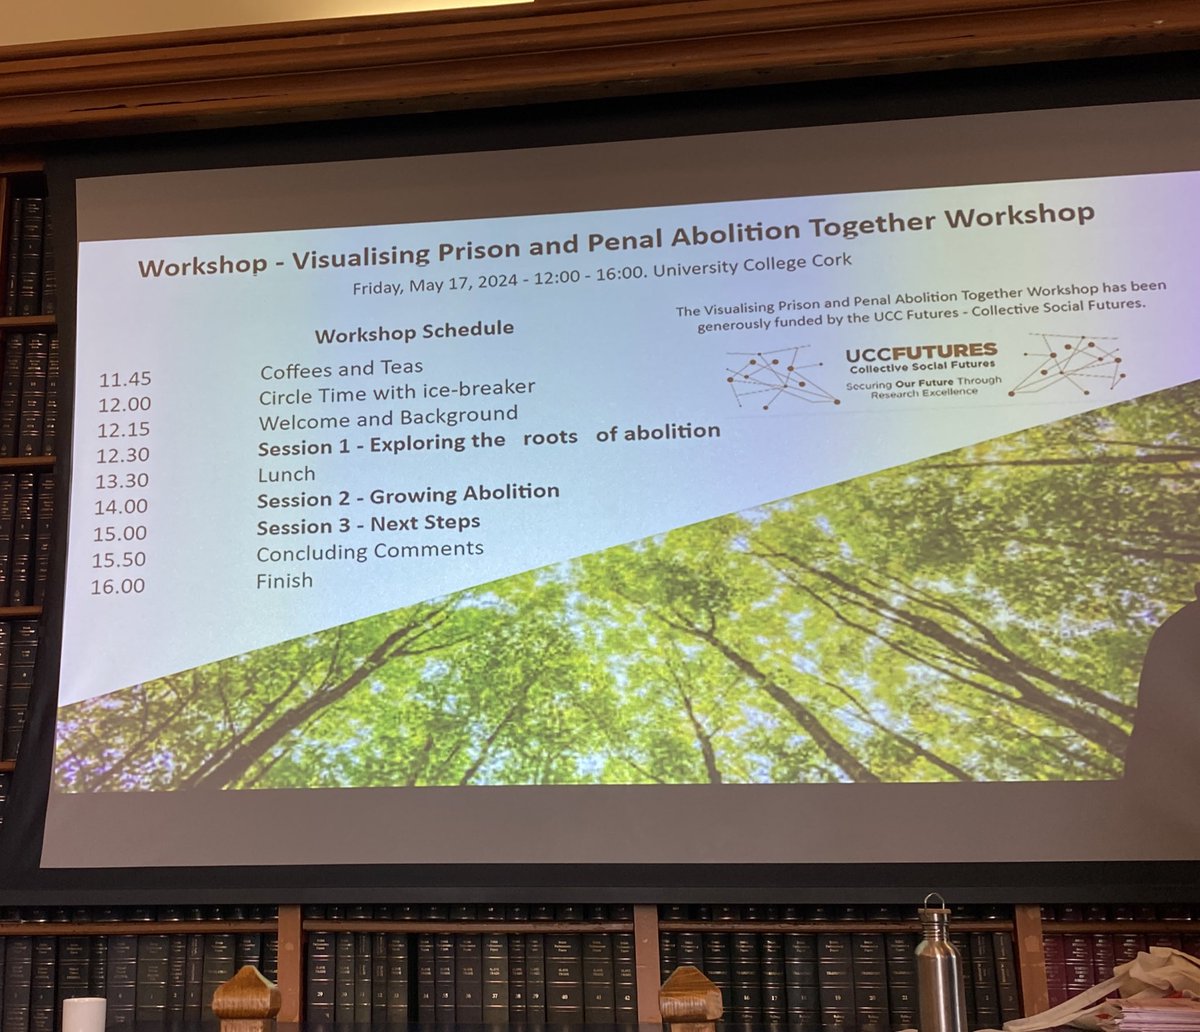 Thought provoking day yesterday at the first of many meetings to develop a Prison & Penal Abolition network here in Ireland—grateful for a space to think about what we can build, grow, & repair when we come together to imagine a more just collective future 🌱 Interested? Join us!